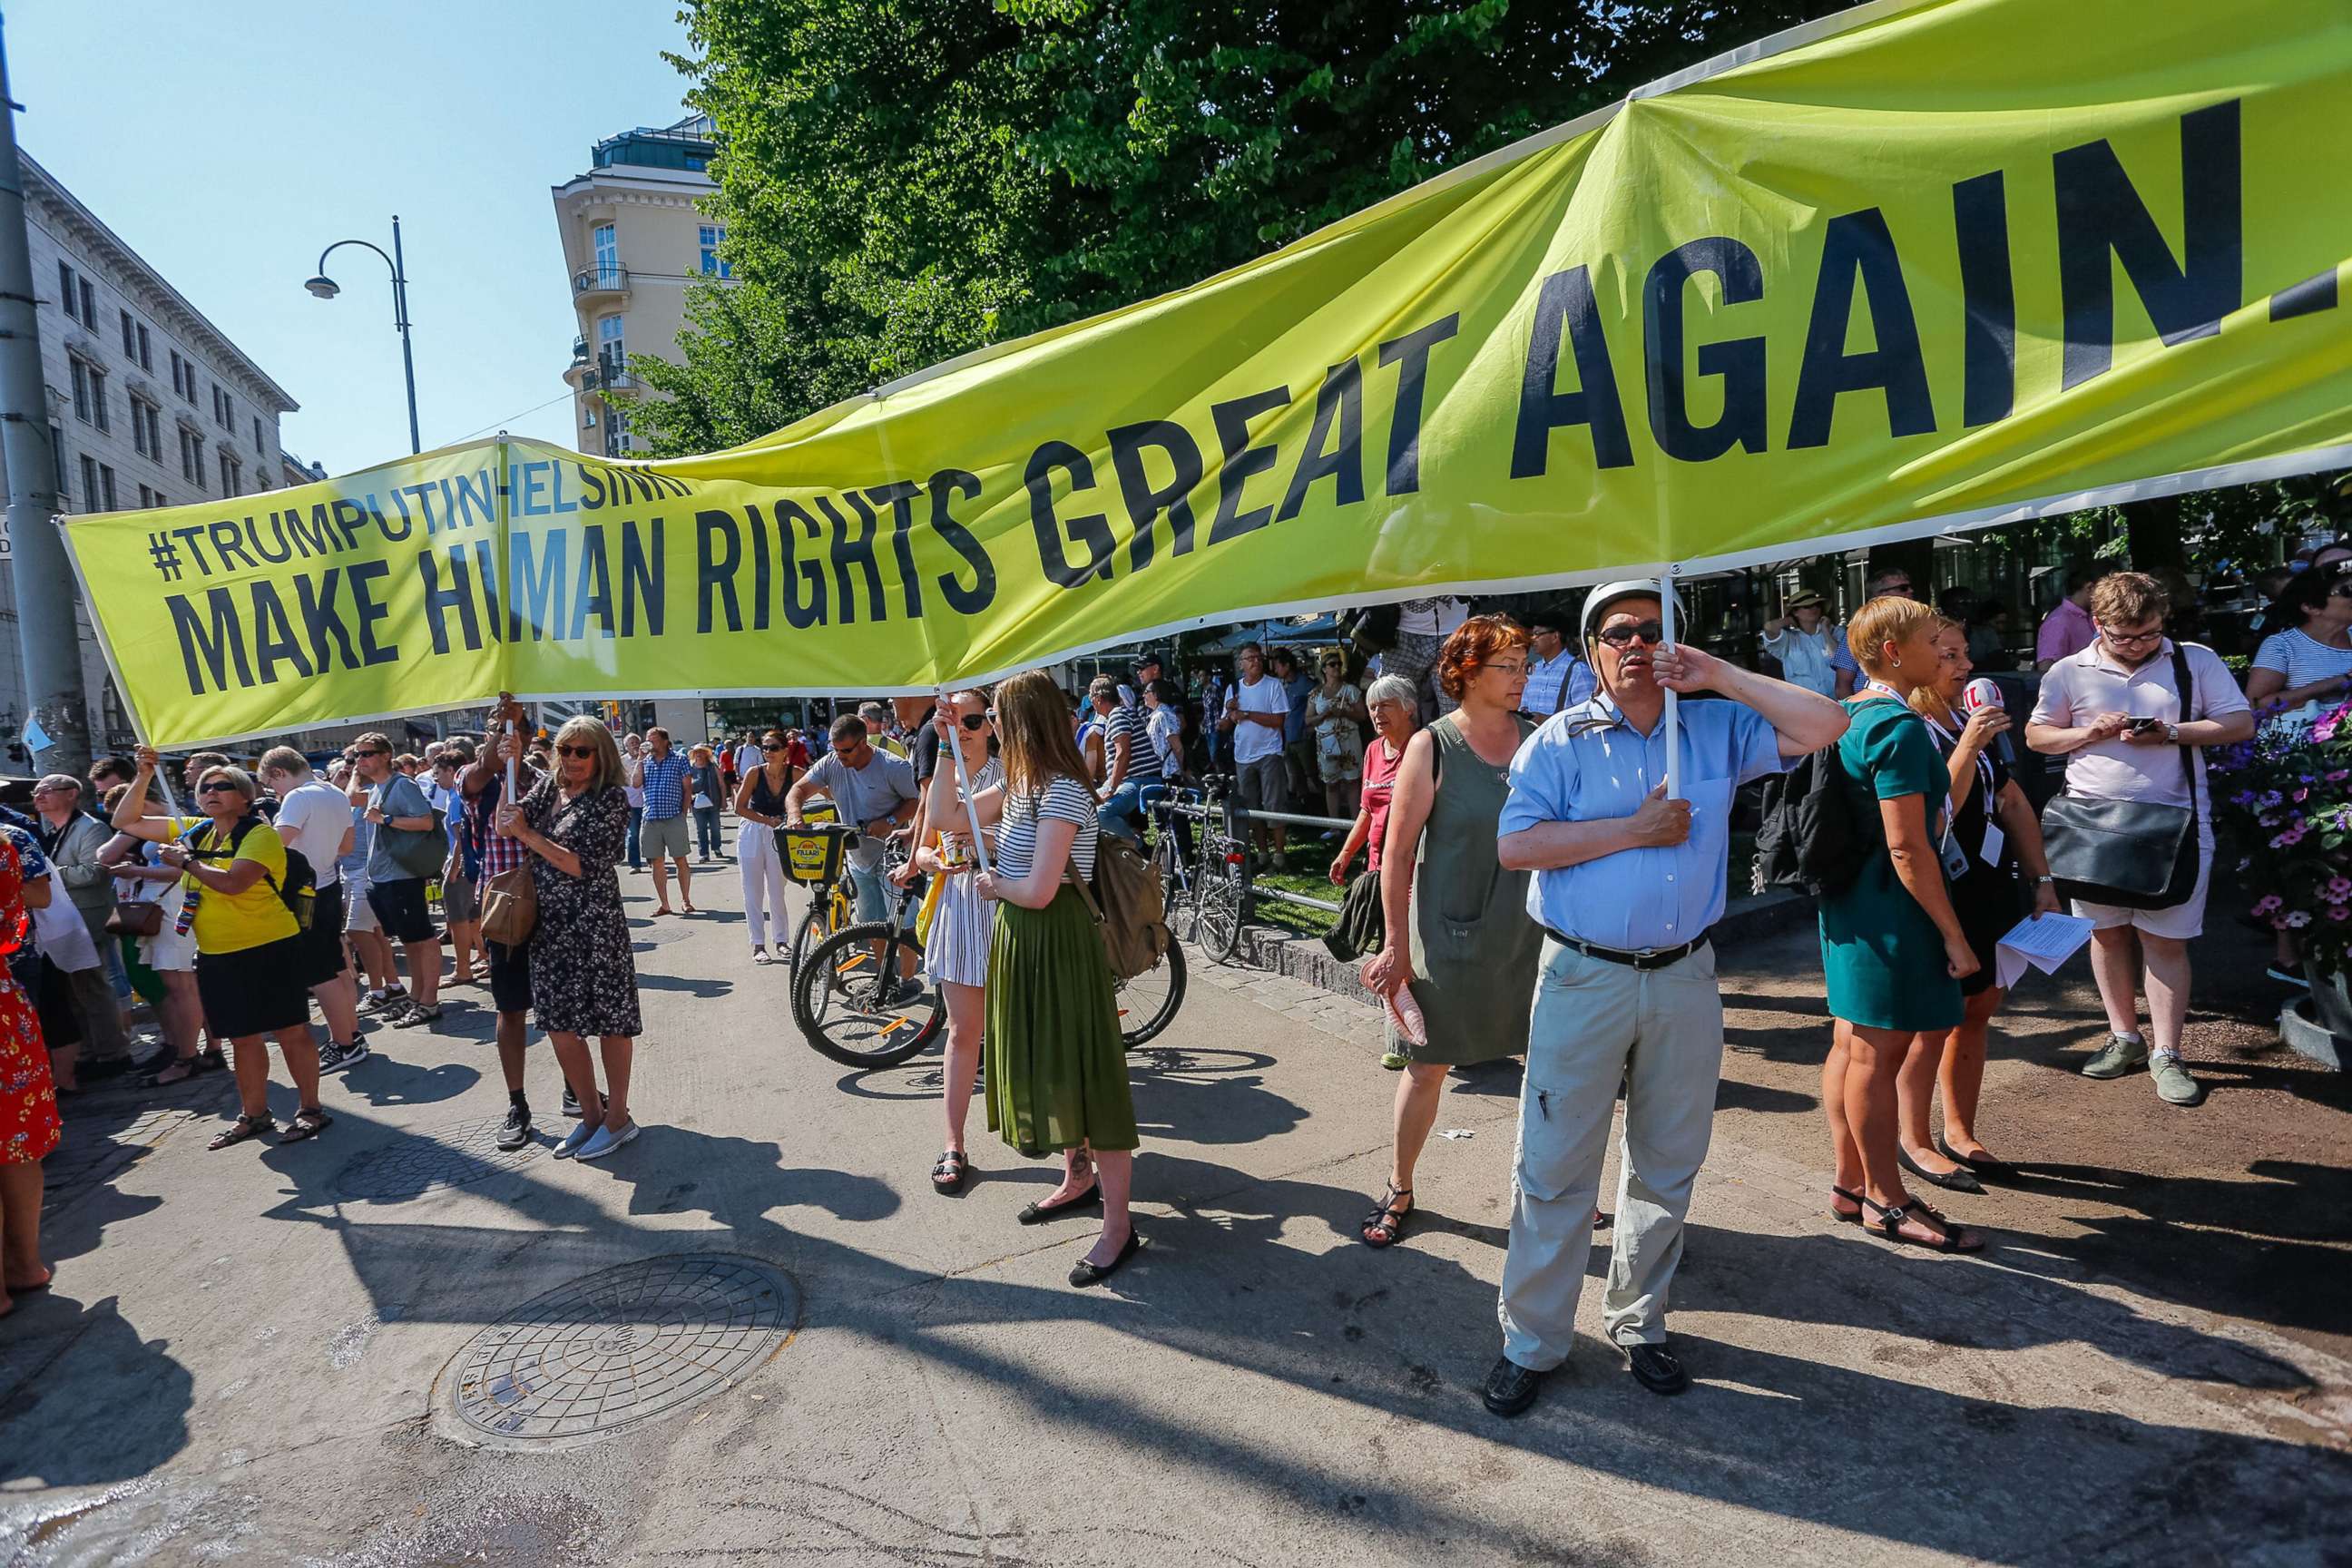 PHOTO: People take part in a demonstration calling for human rights and democracy in Helsinki, Finland, July 16, 2018, on the day of the summit between President Donald Trump and Russian President Vladimir Putin.